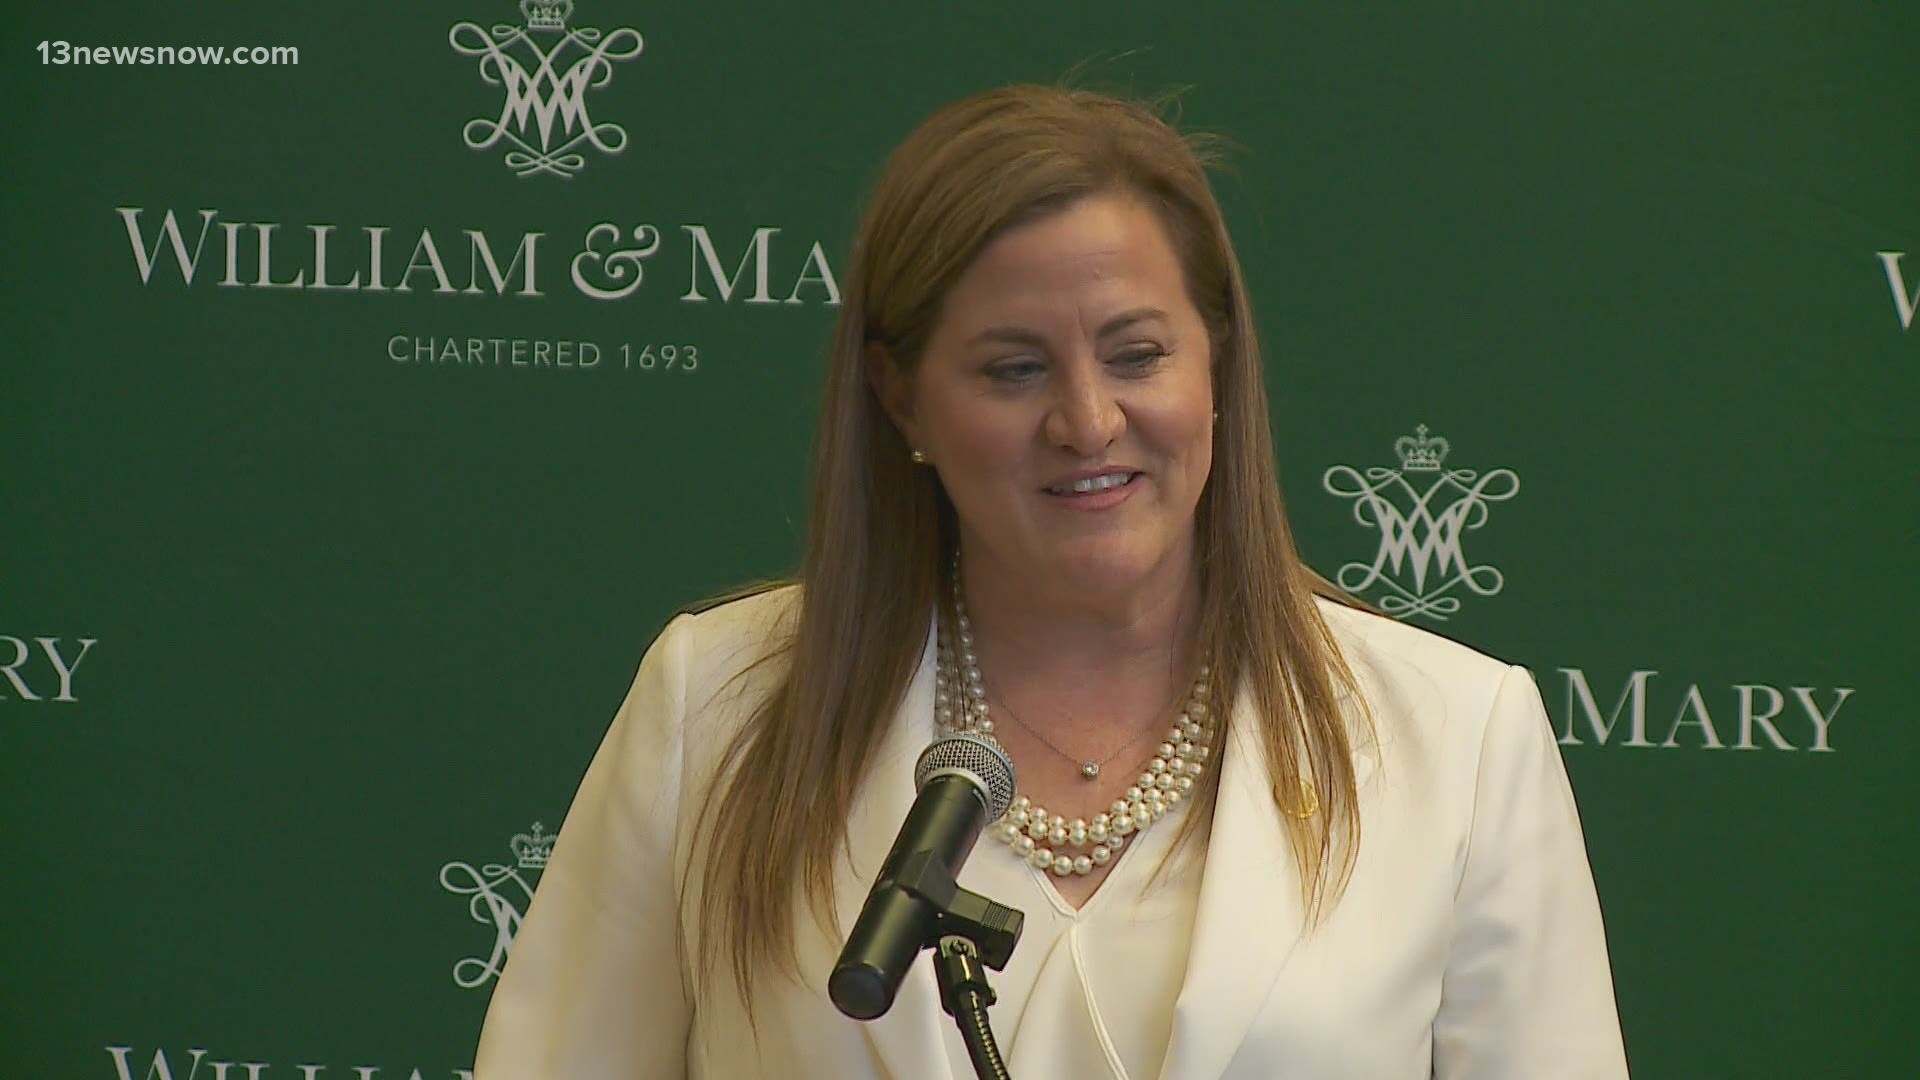 Samantha Huge is resigning from her position as William & Mary Athletics Director. It comes a month after the school decided to cut seven sports starting next year.